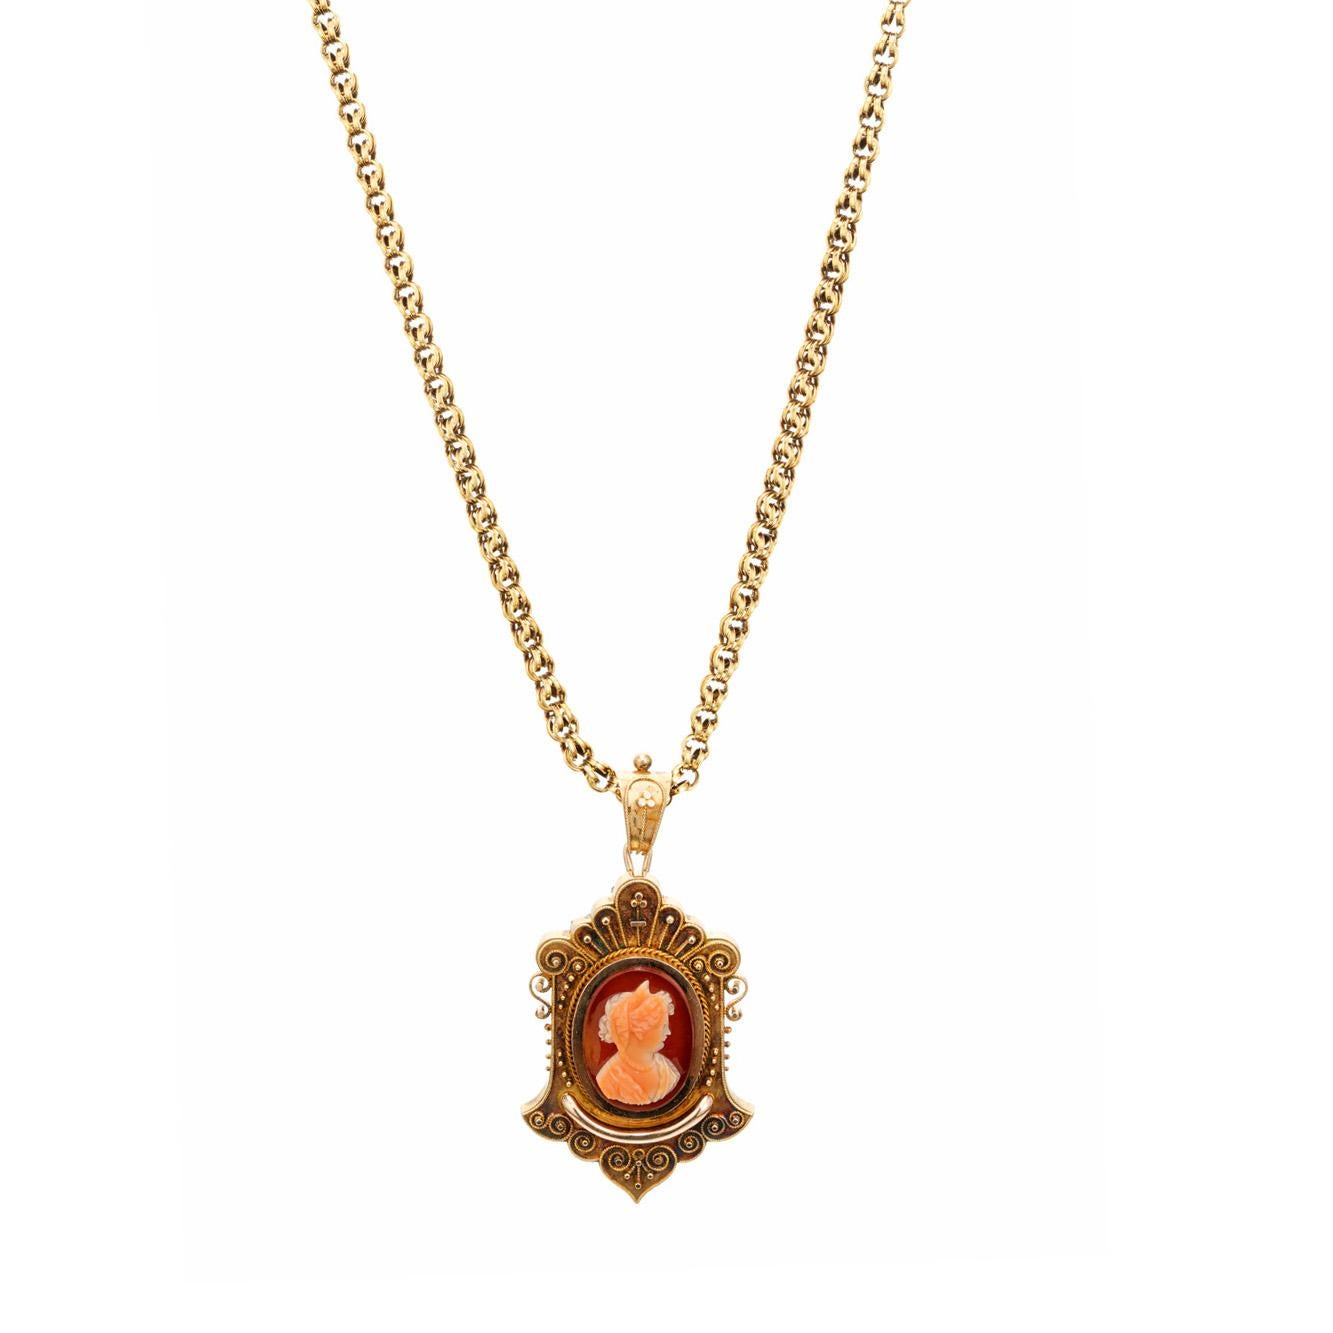 Women's Victorian 1845 Carnelian Hardstone Yellow Gold Cameo Brooch Pendant Necklace For Sale